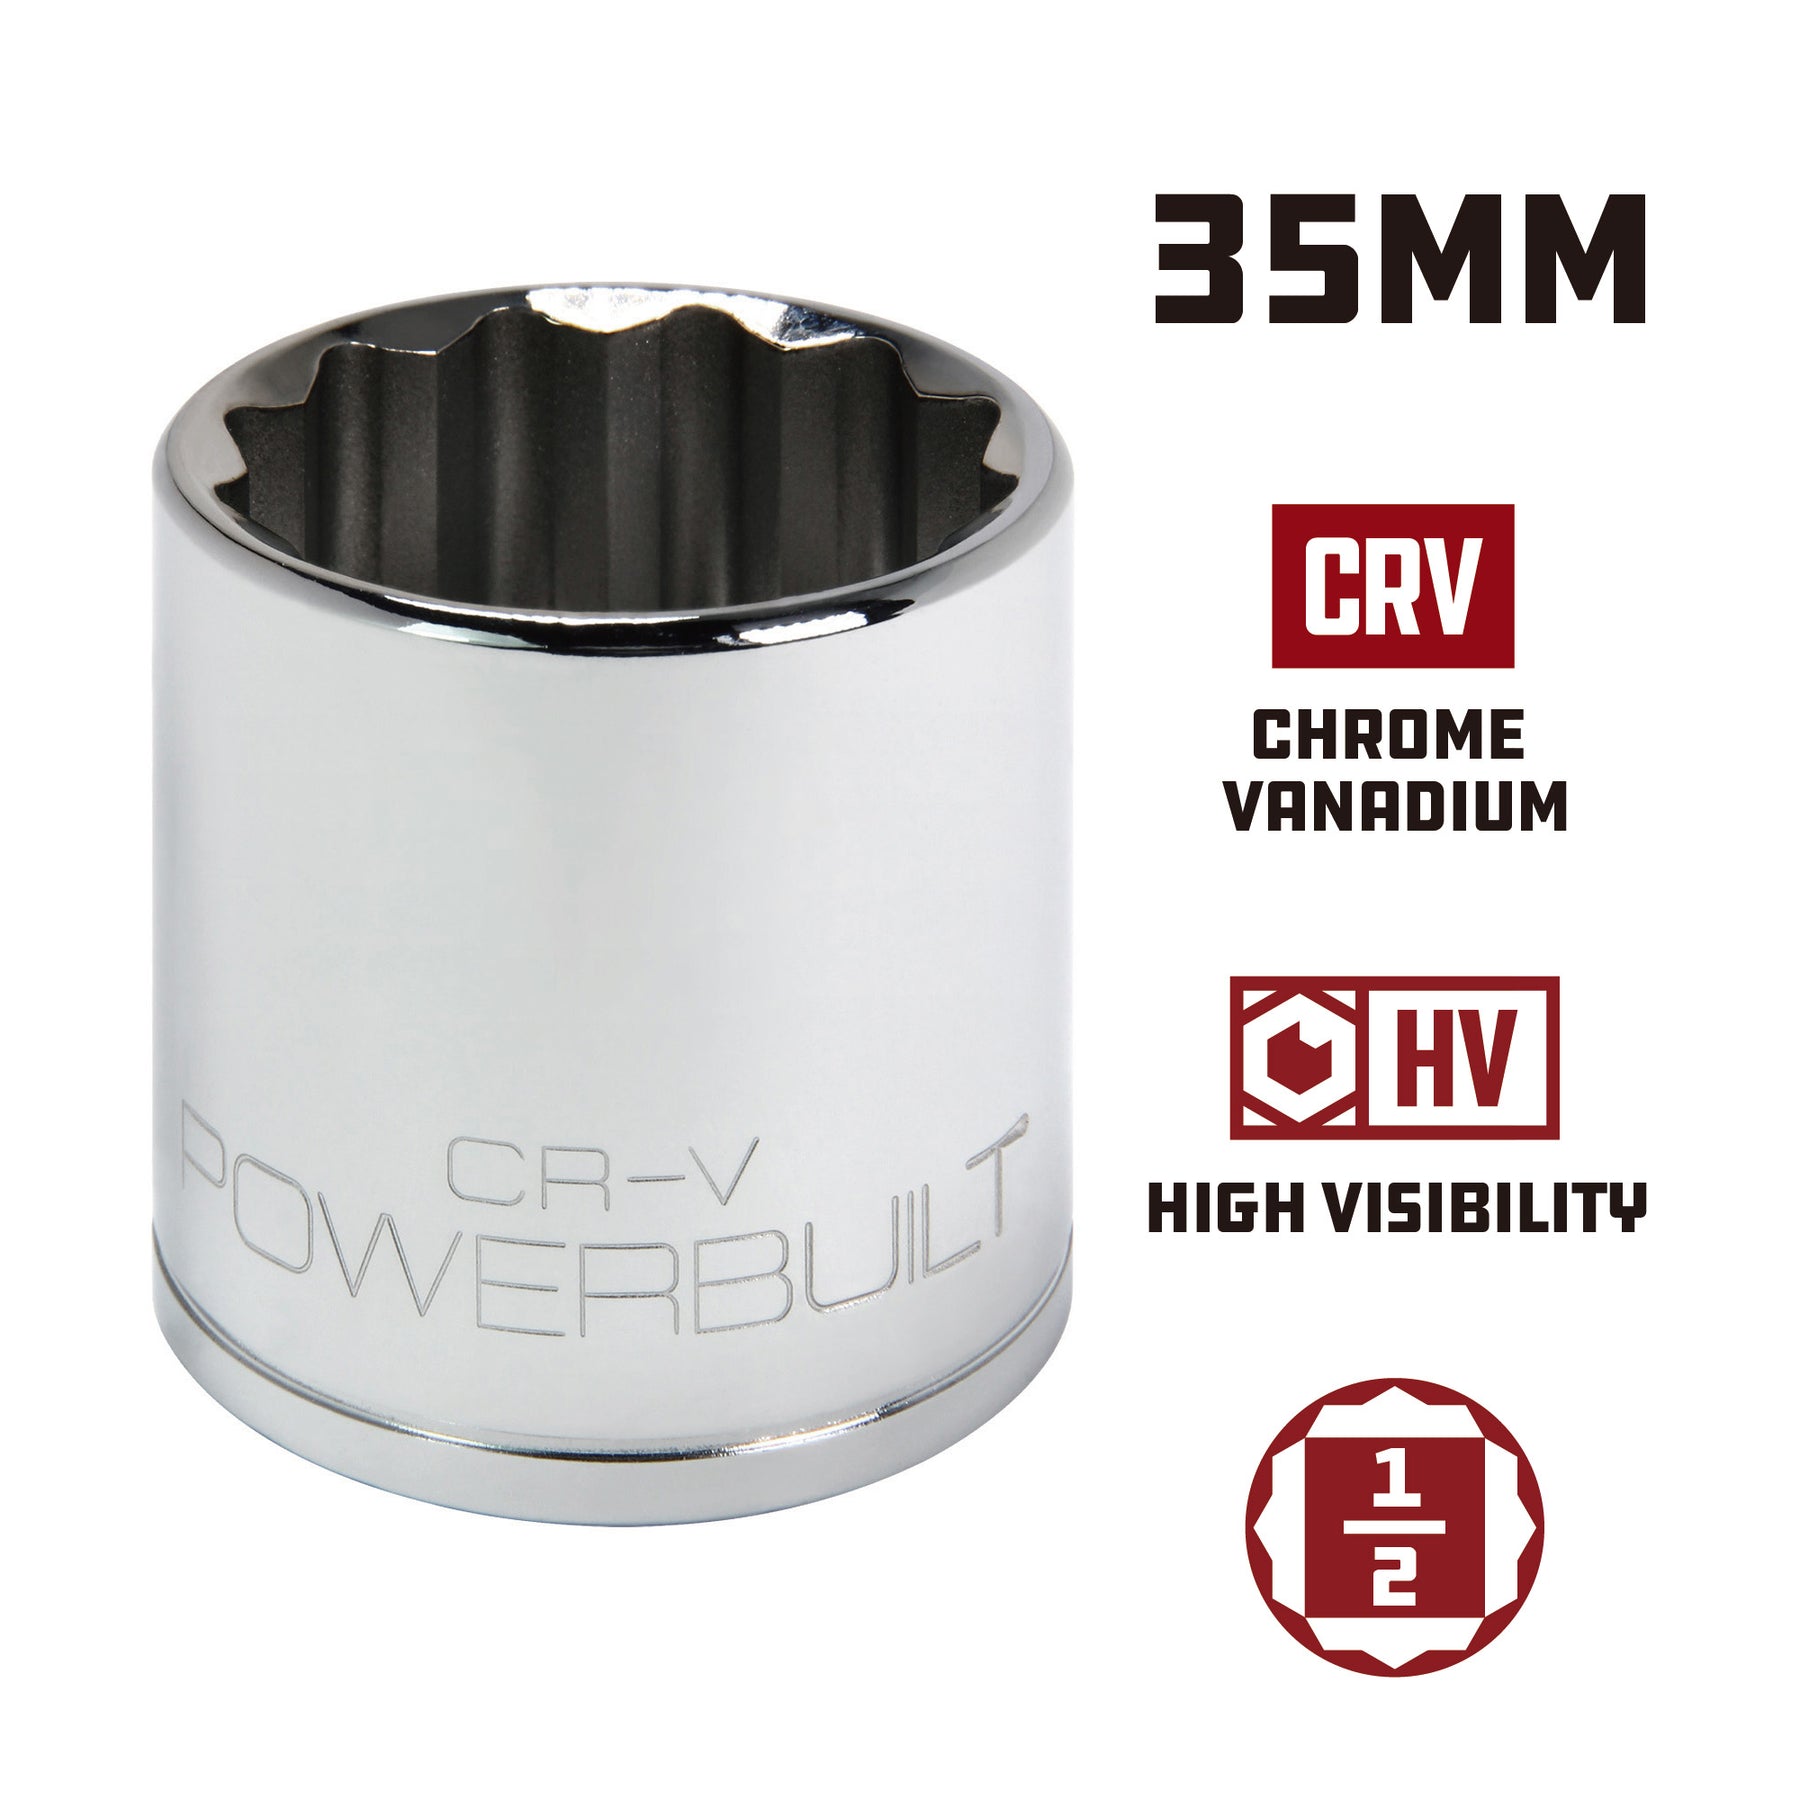 1/2 Inch Drive x 35 MM 12 Point Shallow Socket